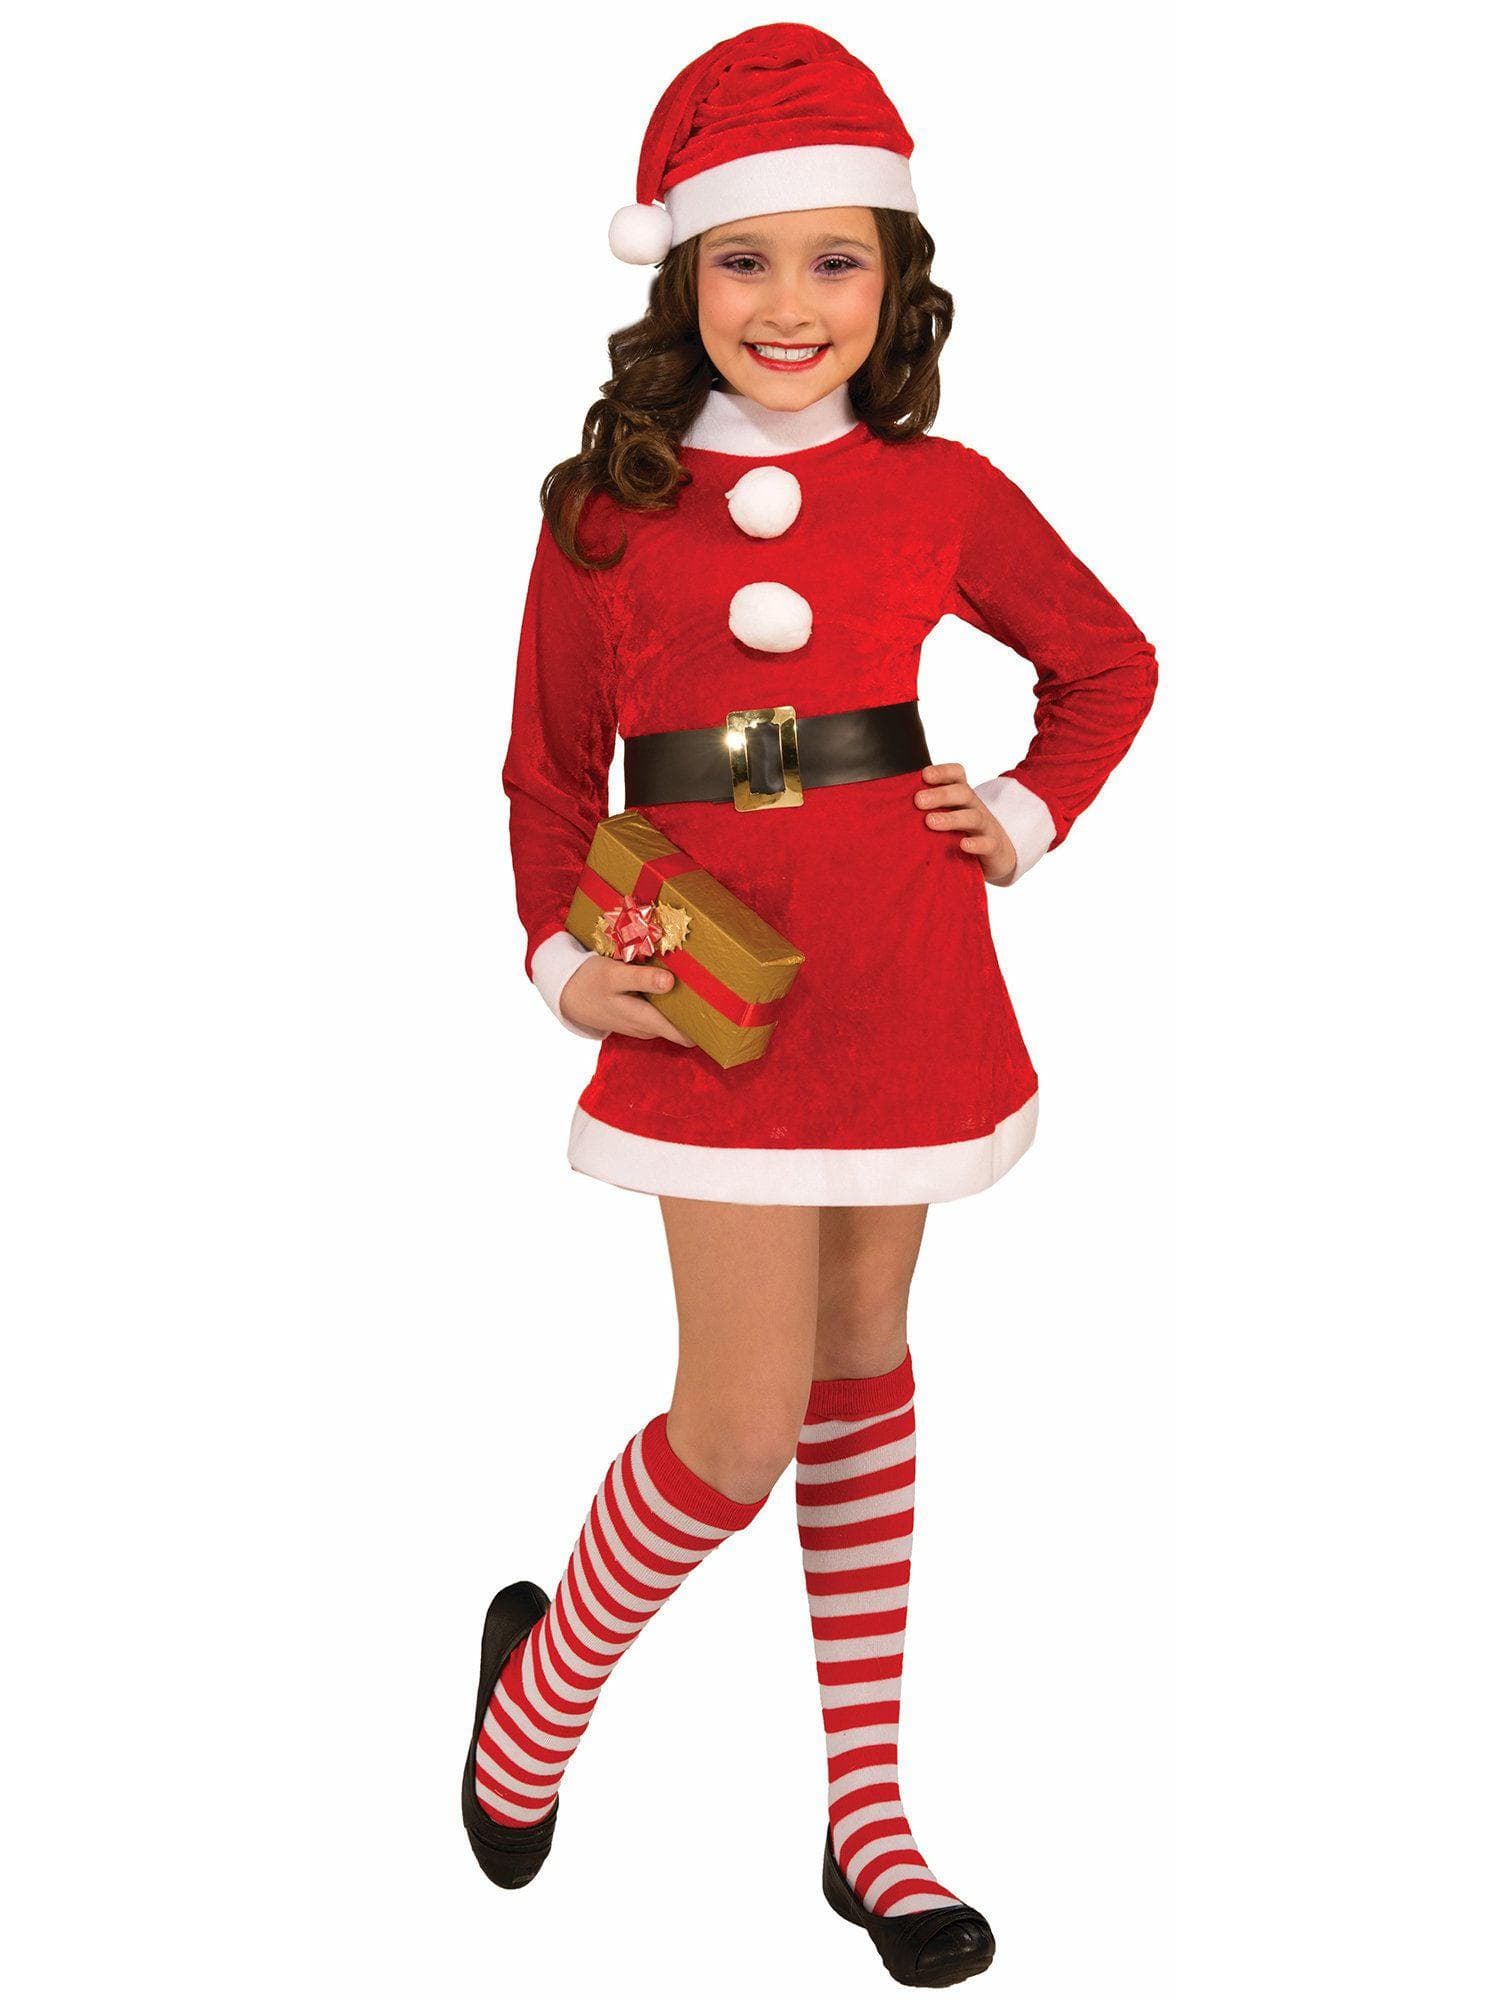 Kids' Red And White Striped Socks - costumes.com